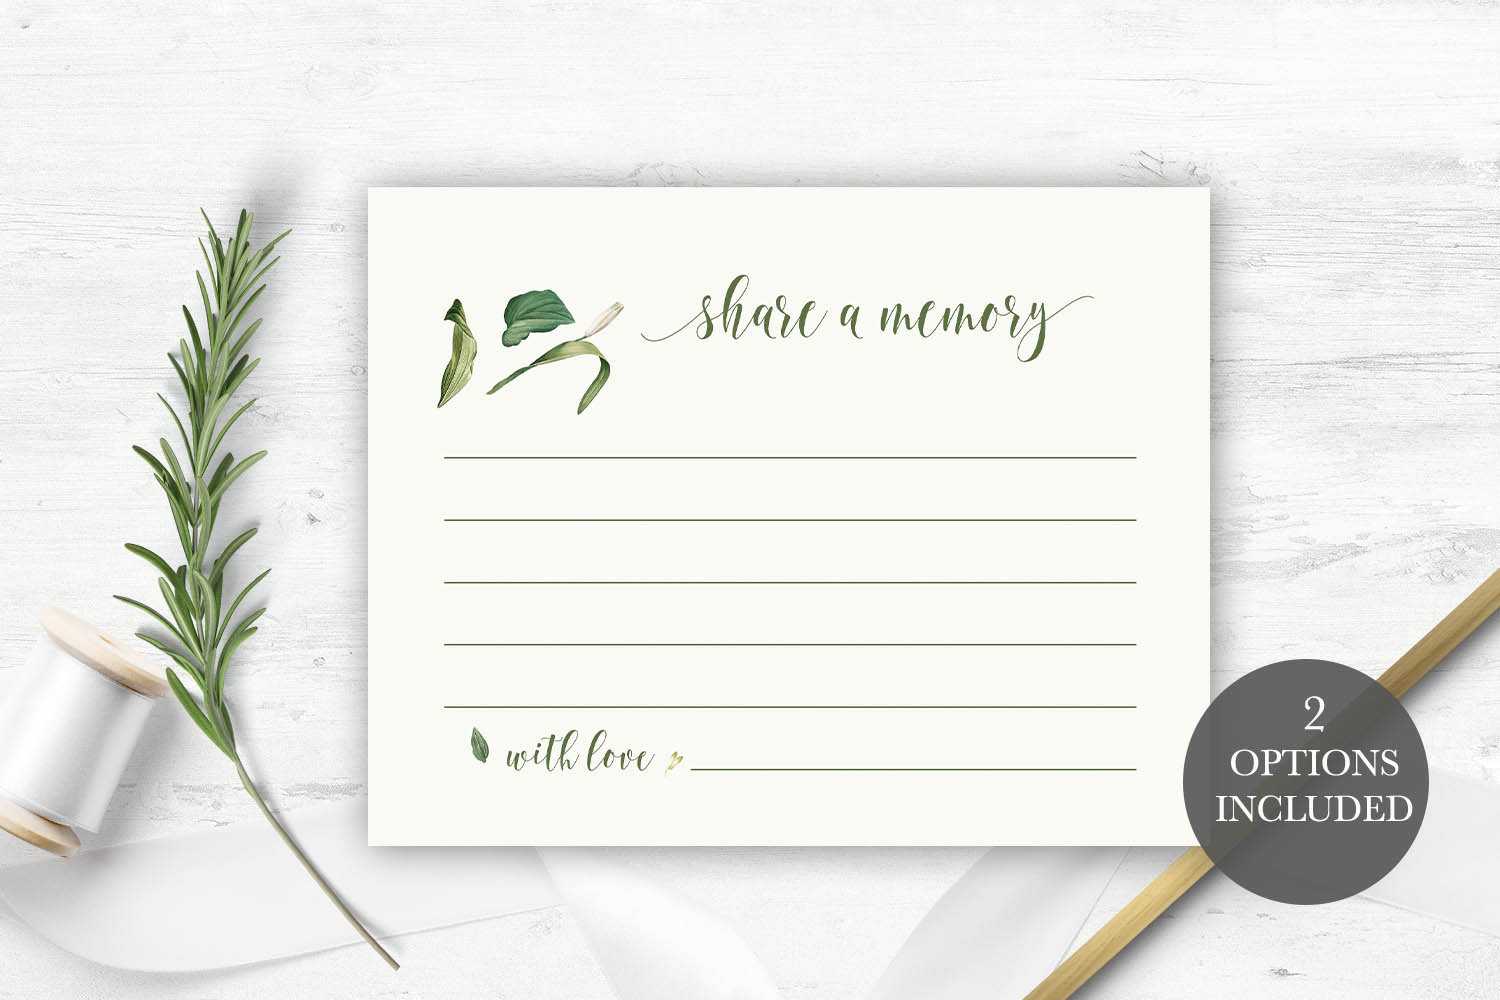 Funeral Share A Memory Card | Printable Funeral Memory Card | Greenery  Memorial Card Template | Funeral Cards | Memorial Cards Template Pertaining To In Memory Cards Templates